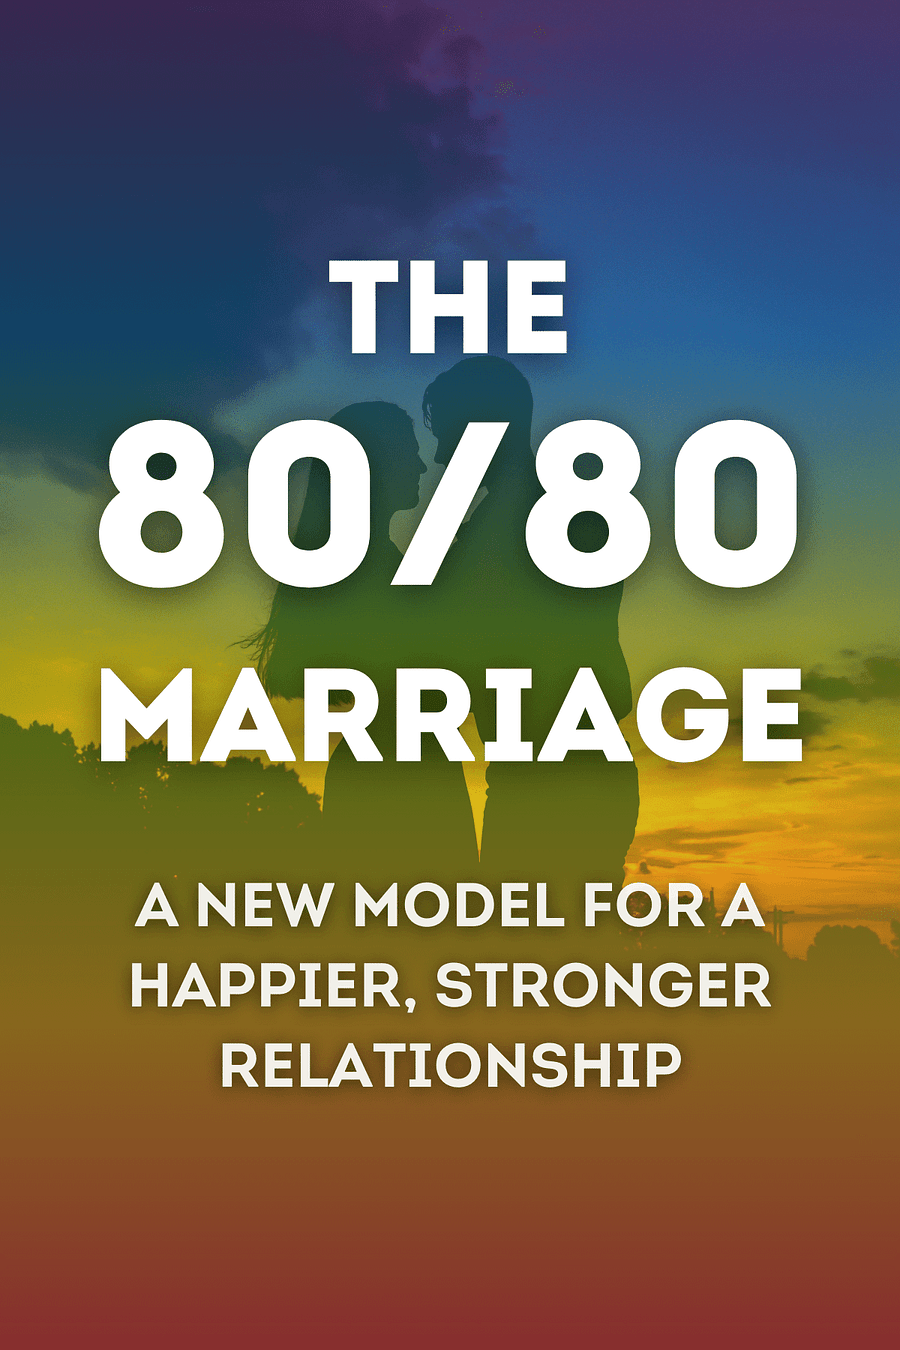 The 80/80 Marriage by Nate Klemp, Kaley Klemp - Book Summary